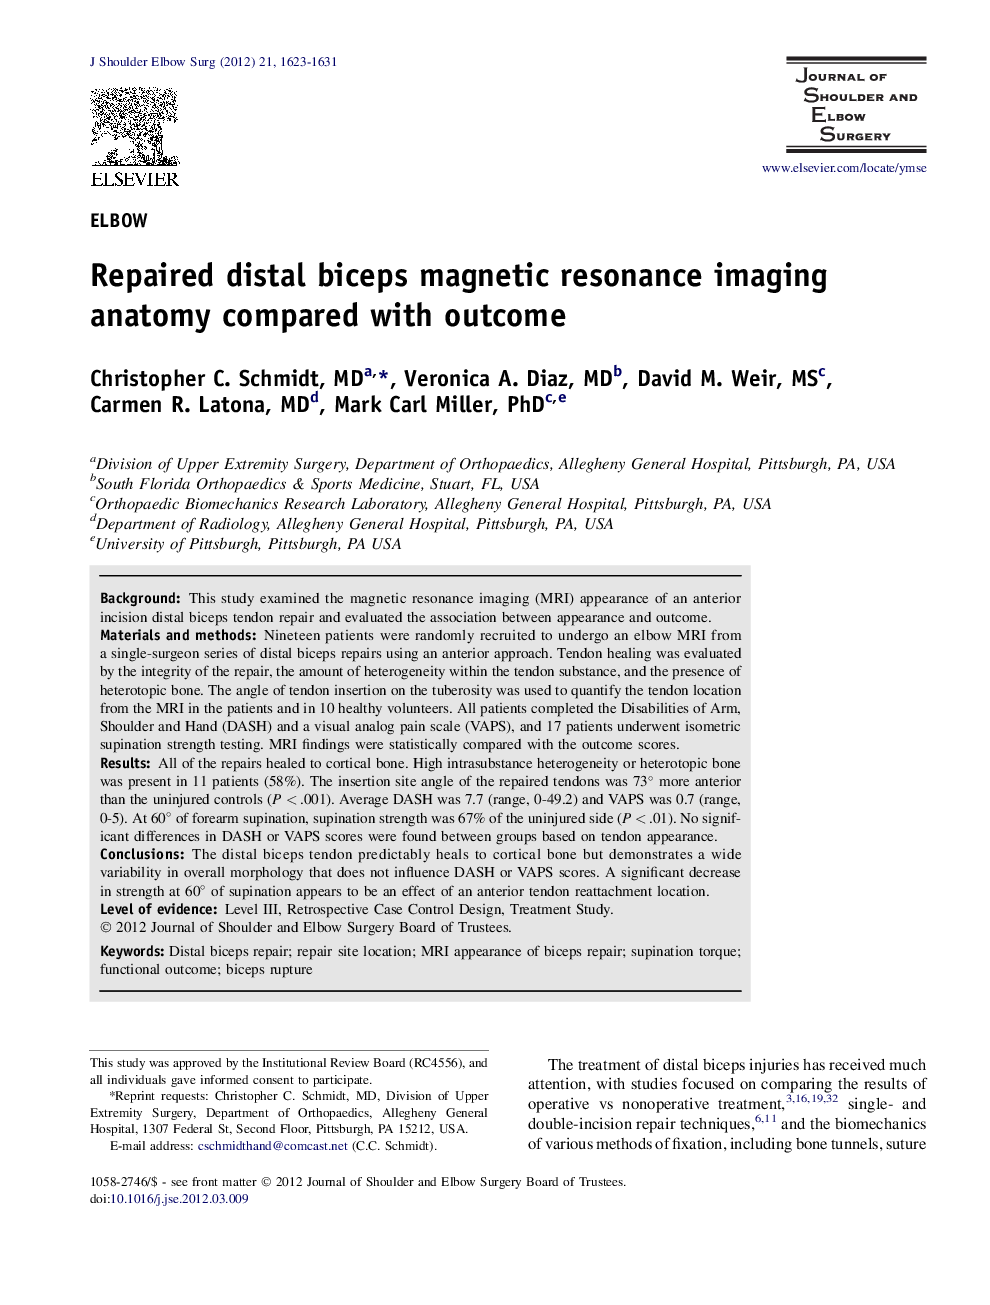 Repaired distal biceps magnetic resonance imaging anatomy compared with outcome 